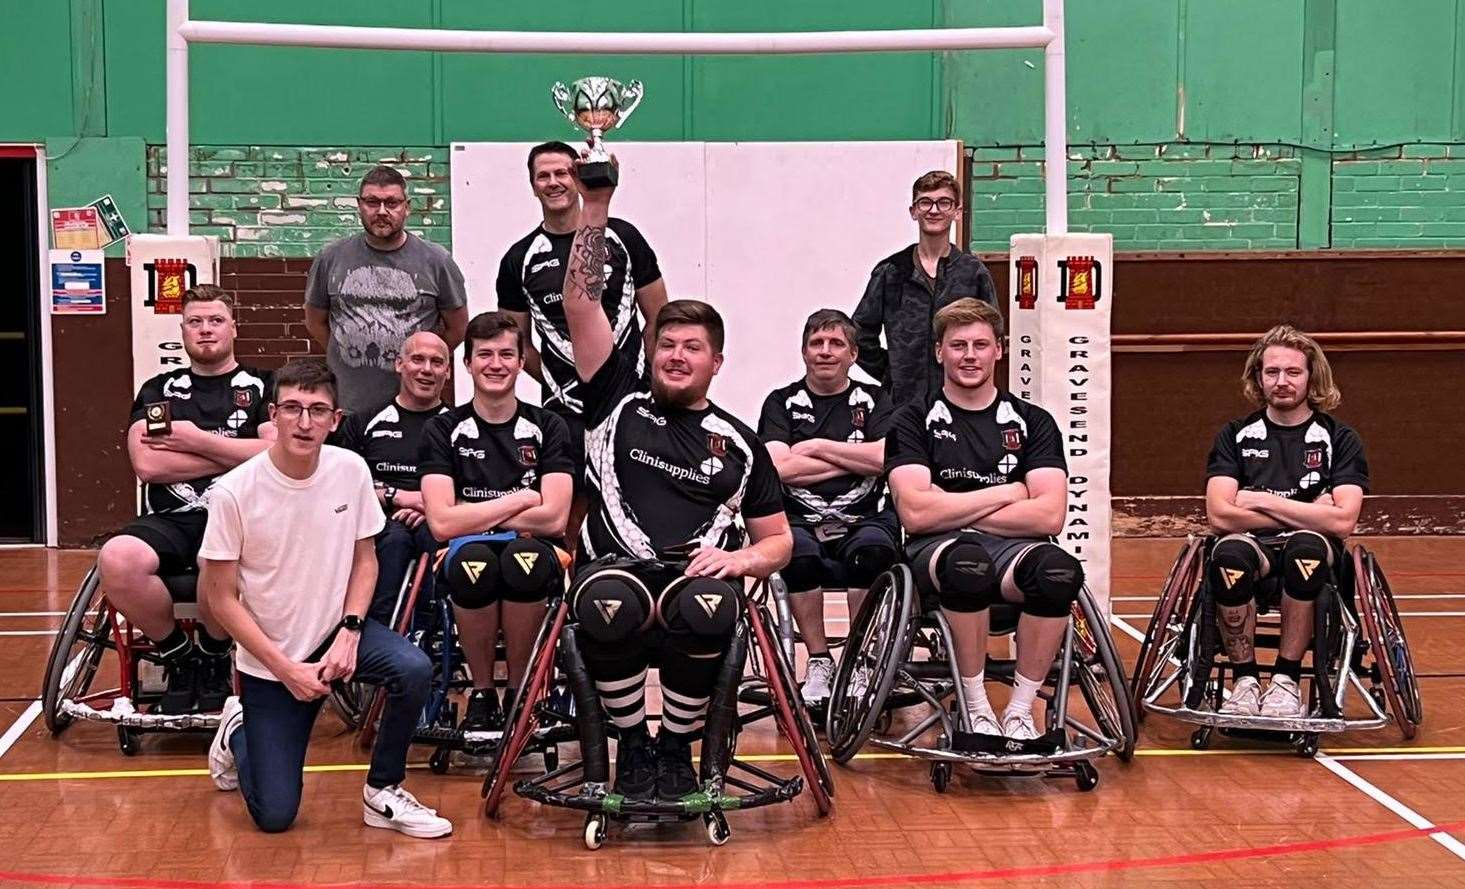 Gravesend Dynamite won the RFL Wheelchair Rugby League Championship with a 58-23 victory over Medway's Woodlands Warriors